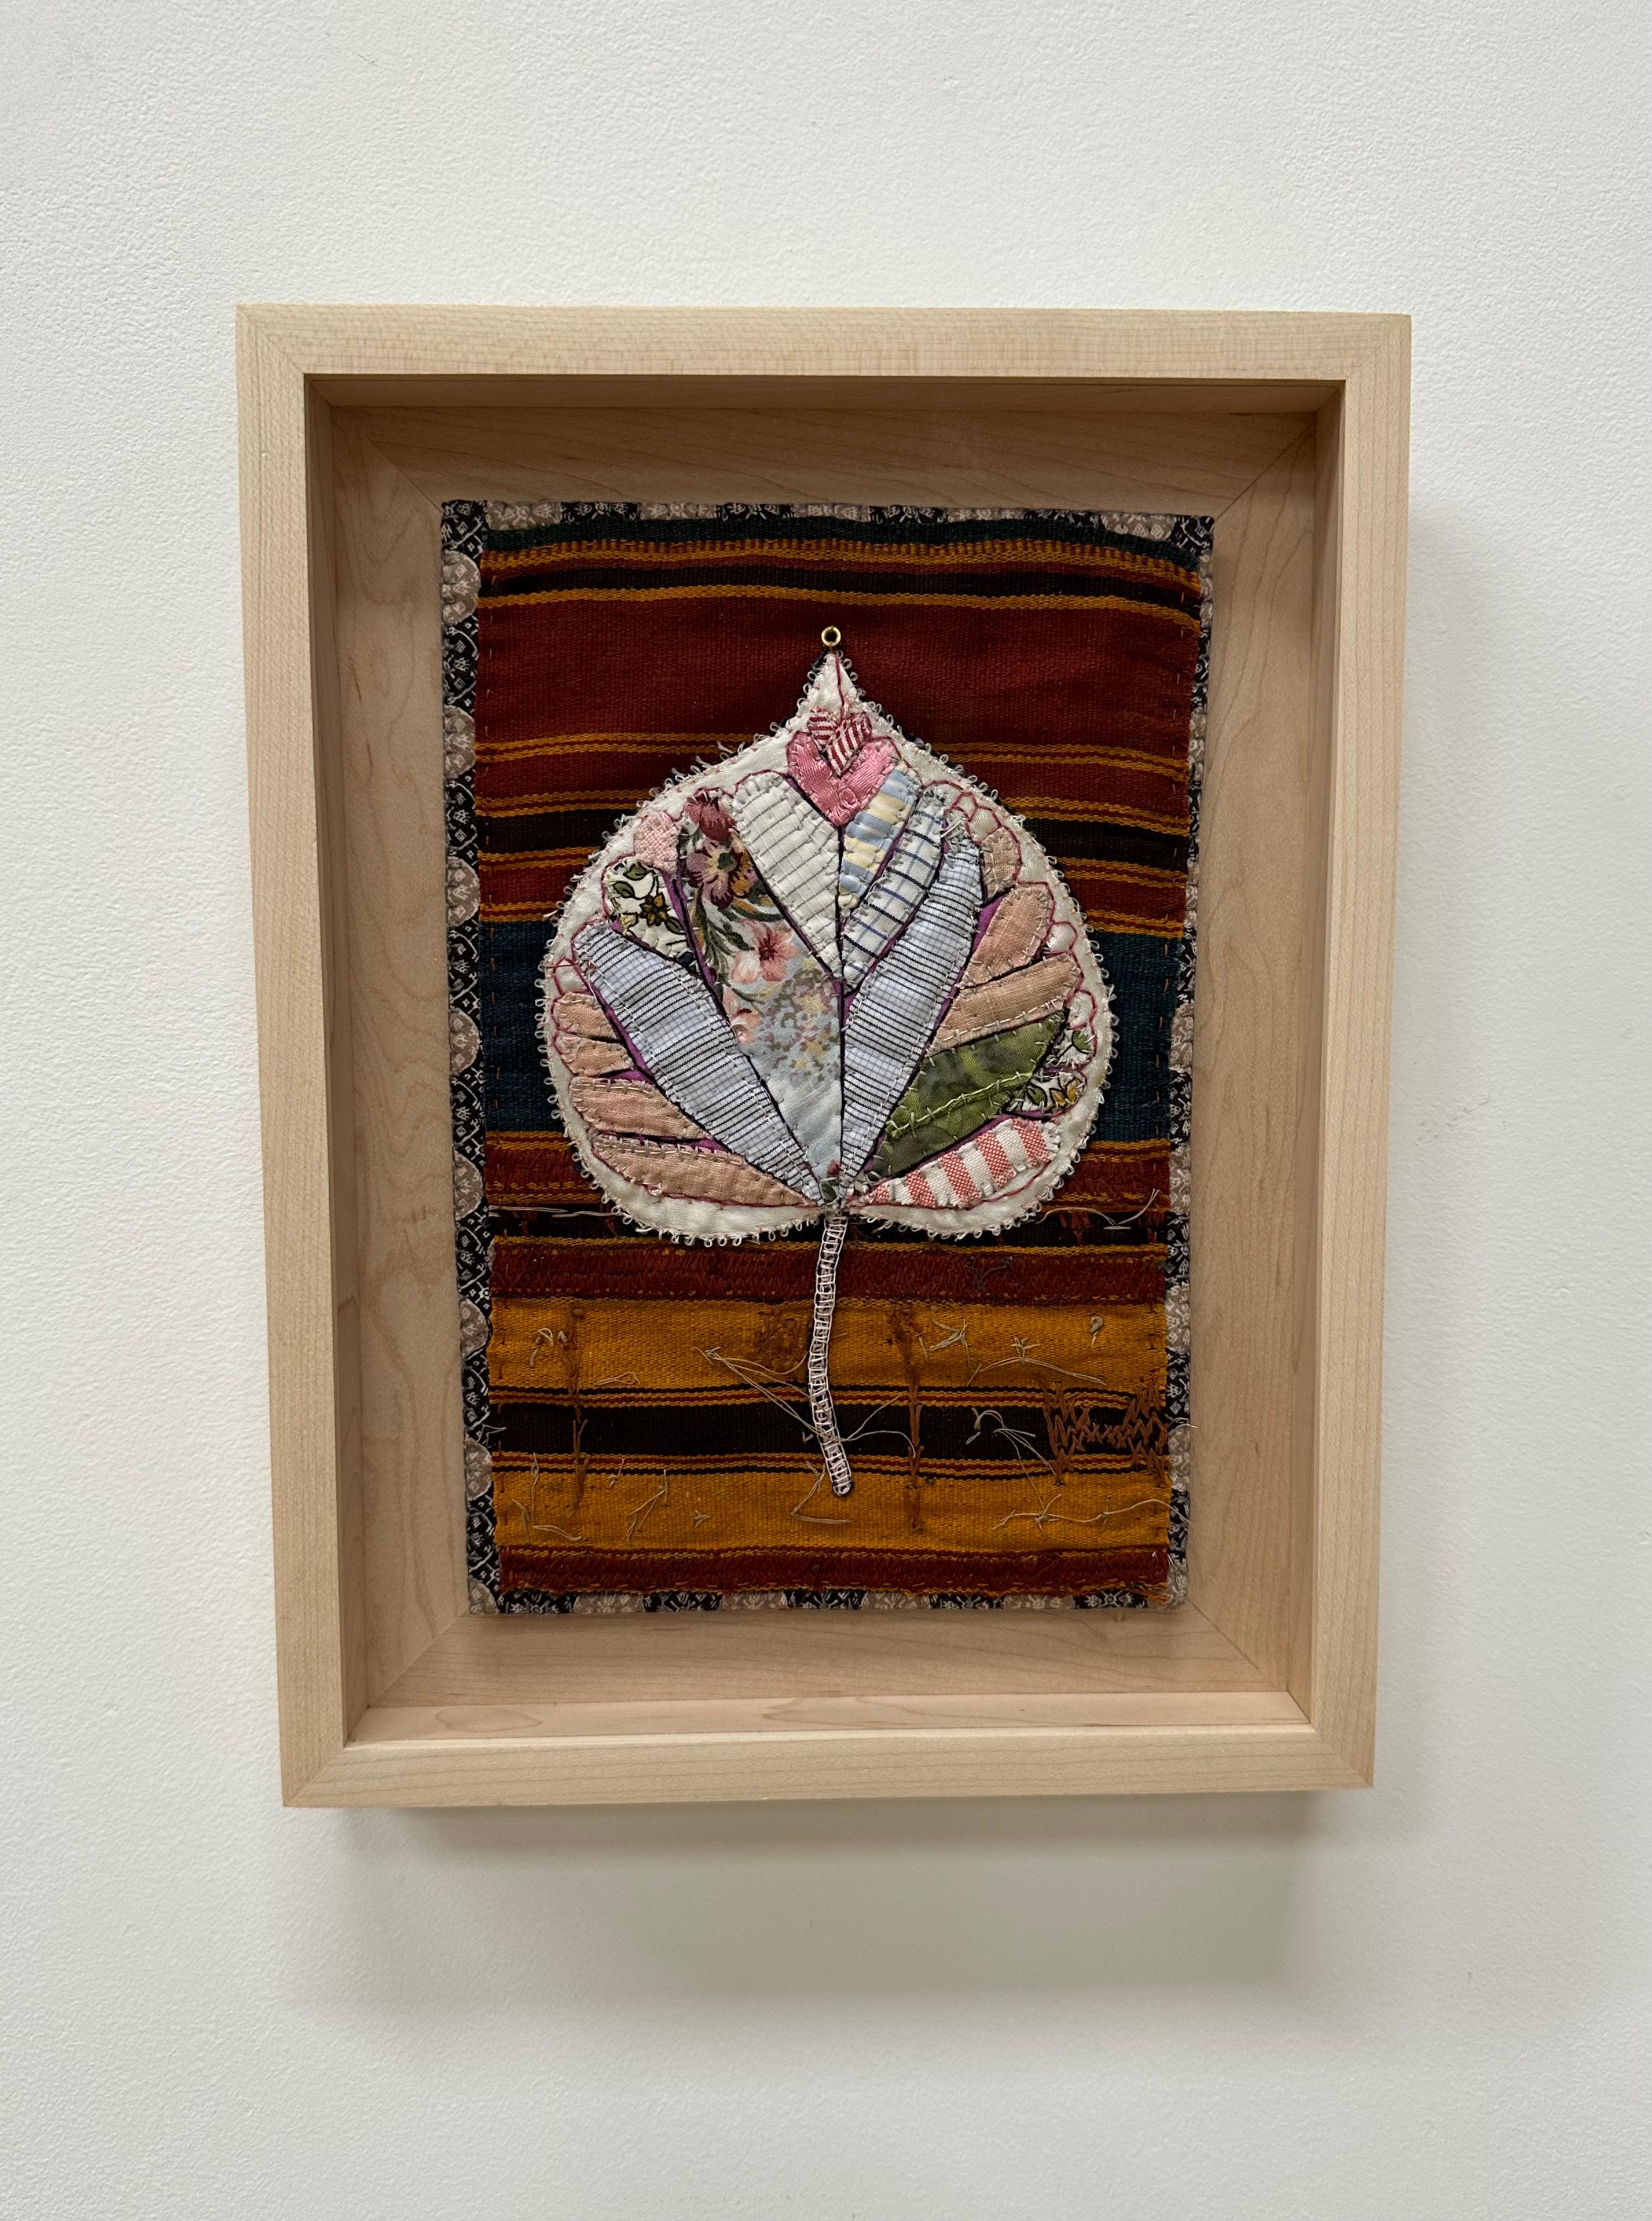 Tailored Herbaria Cercis Canadensis Pocantico River Watershed, Botanical Textile - Contemporary Mixed Media Art by Donna Sharrett